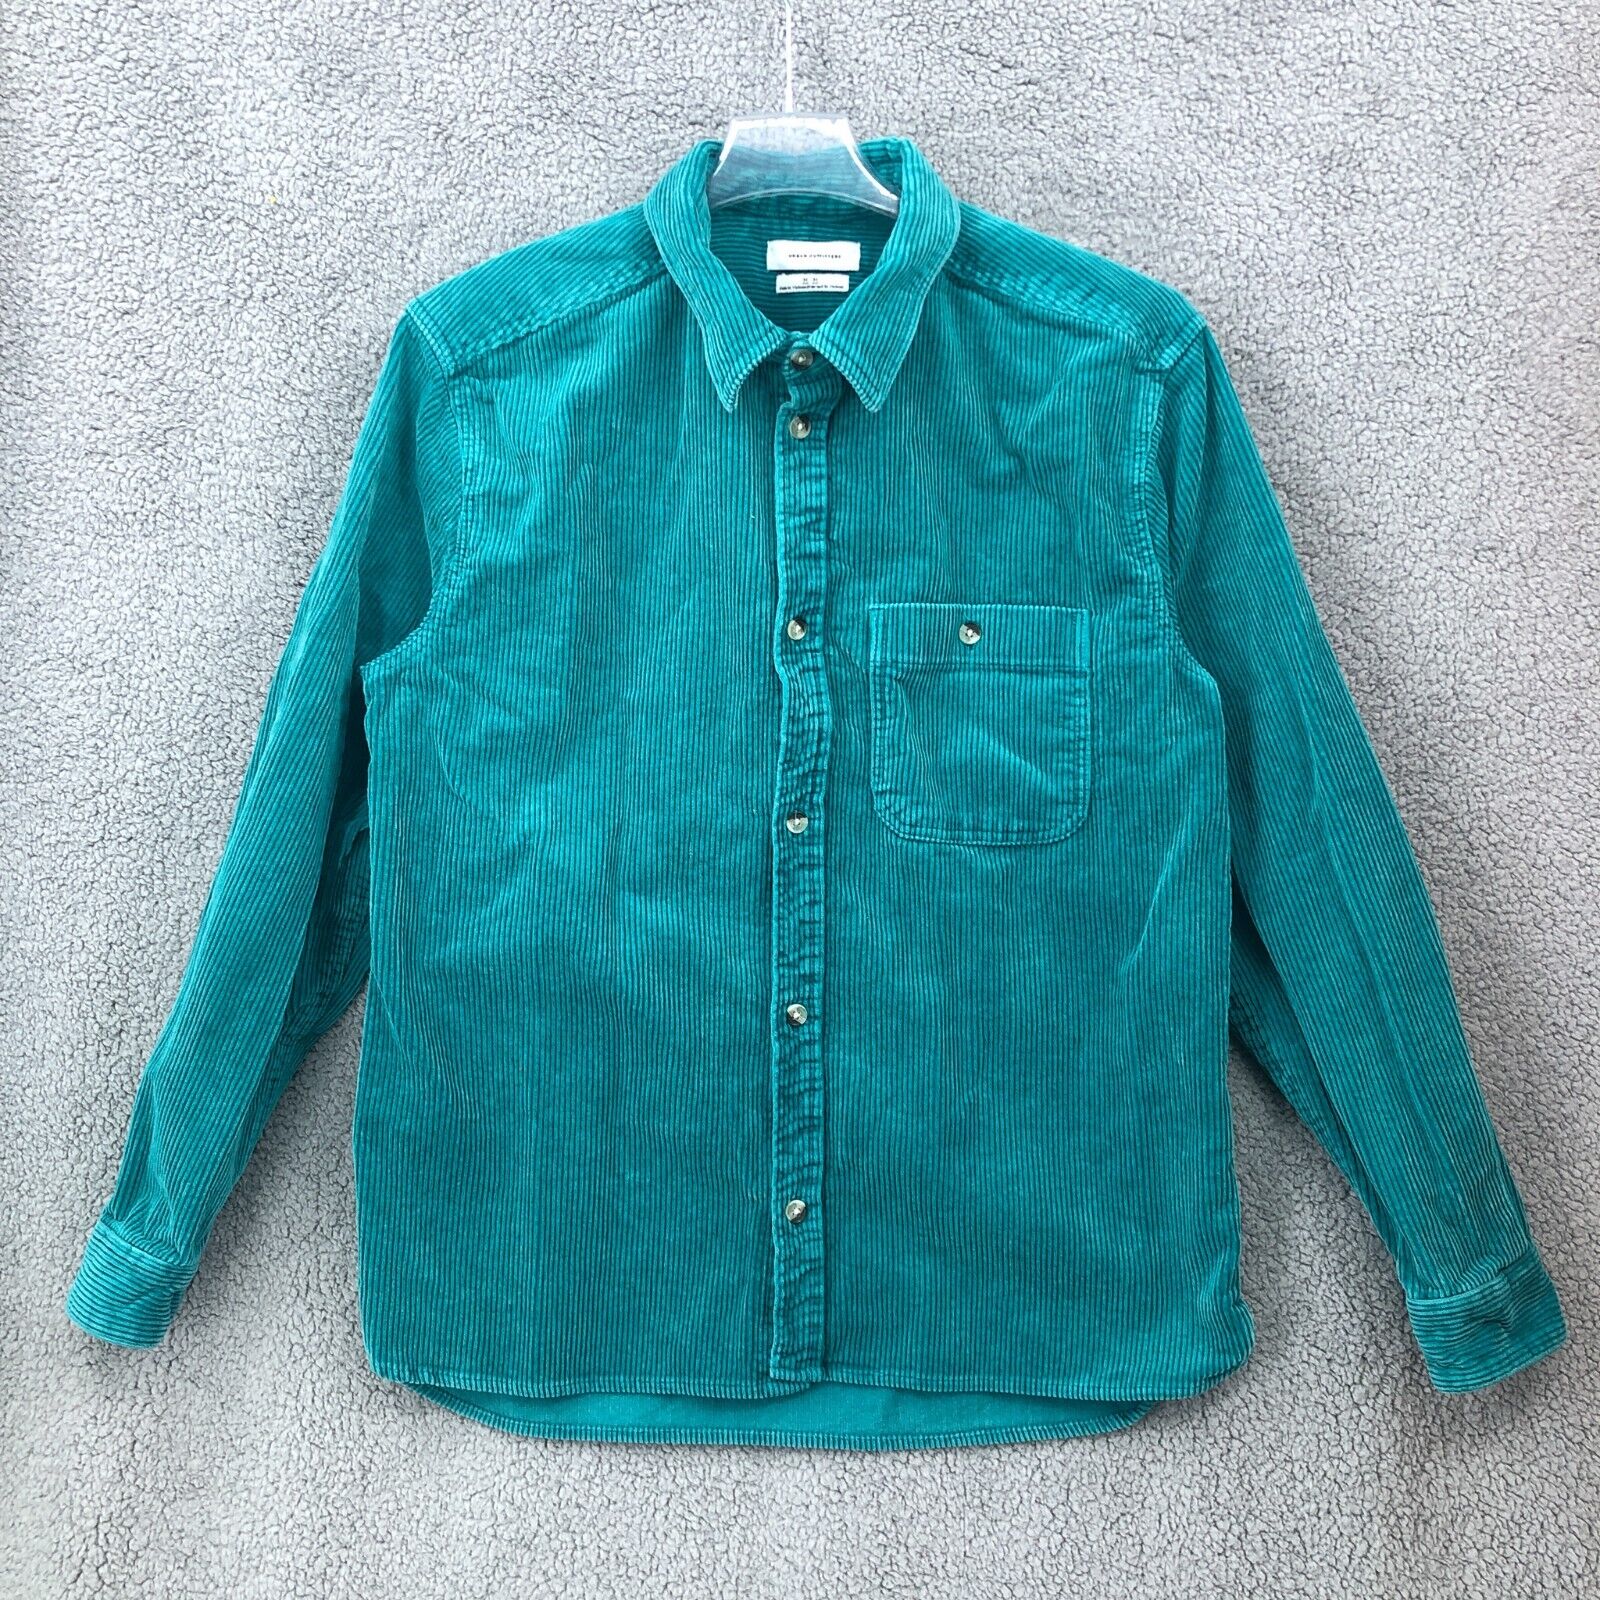 Urban Outfitters Jacket Mens Medium Teal Corduroy Button Up Long Sleeve  Shacket